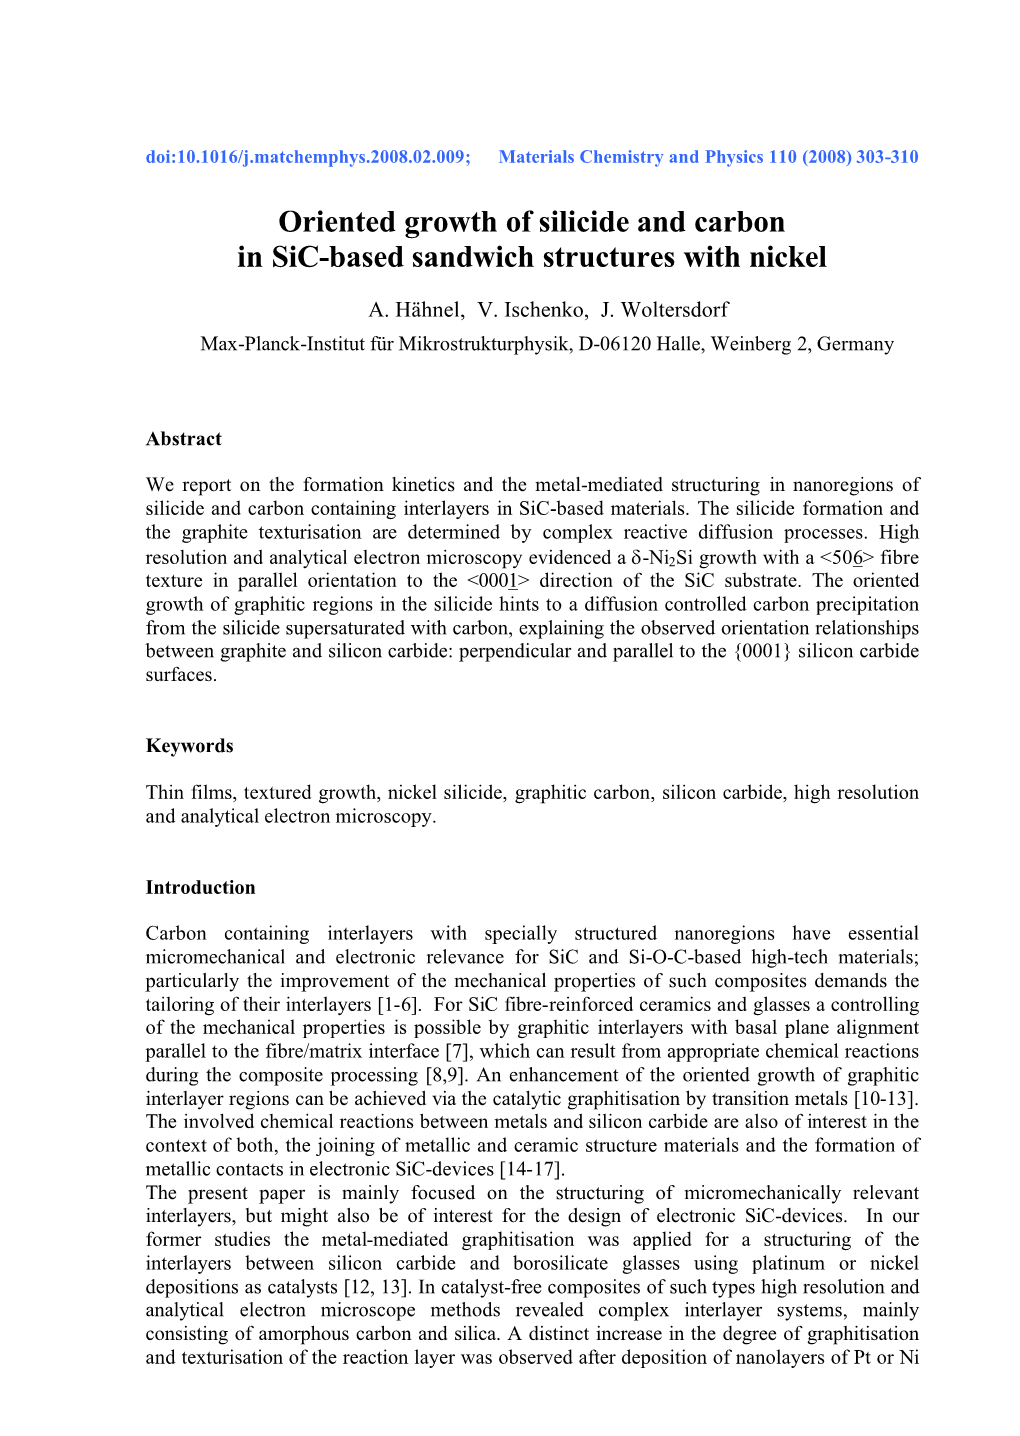 Oriented Growth of Silicide and Carbon in Sic-Based Sandwich Structures with Nickel